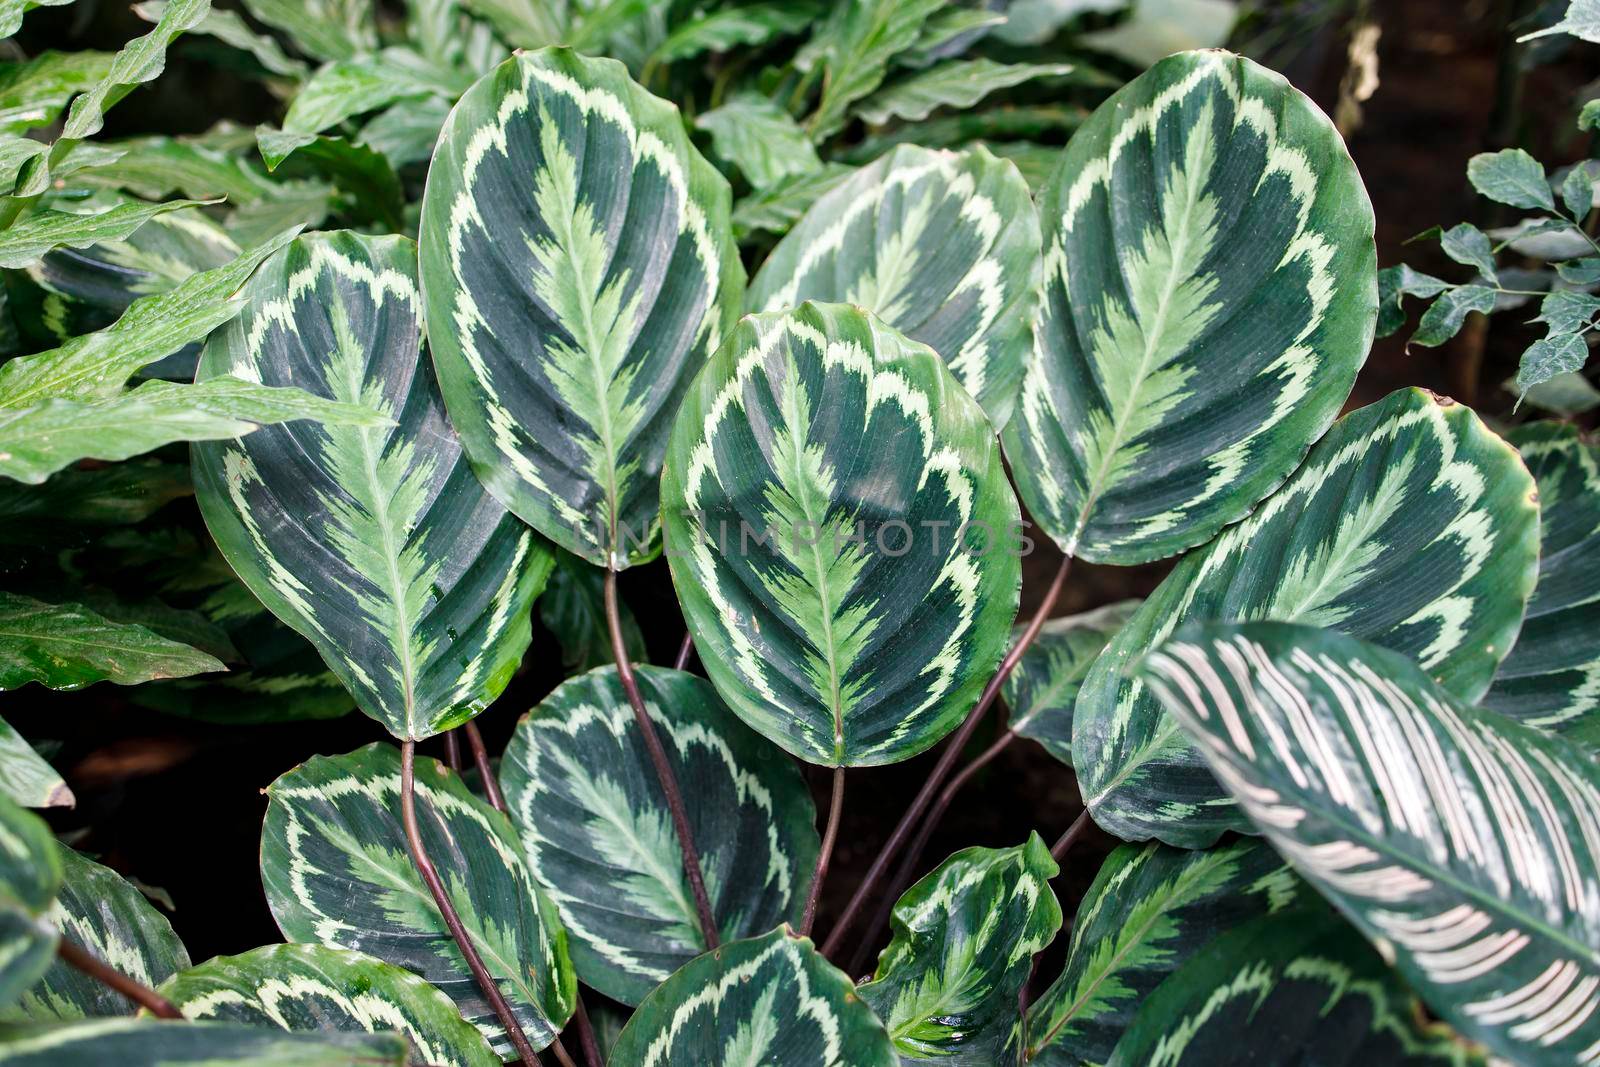 Calathea roseopicta, the rose-painted calathea, is a species of plant in the family Marantaceae, native to northwest Brazil.